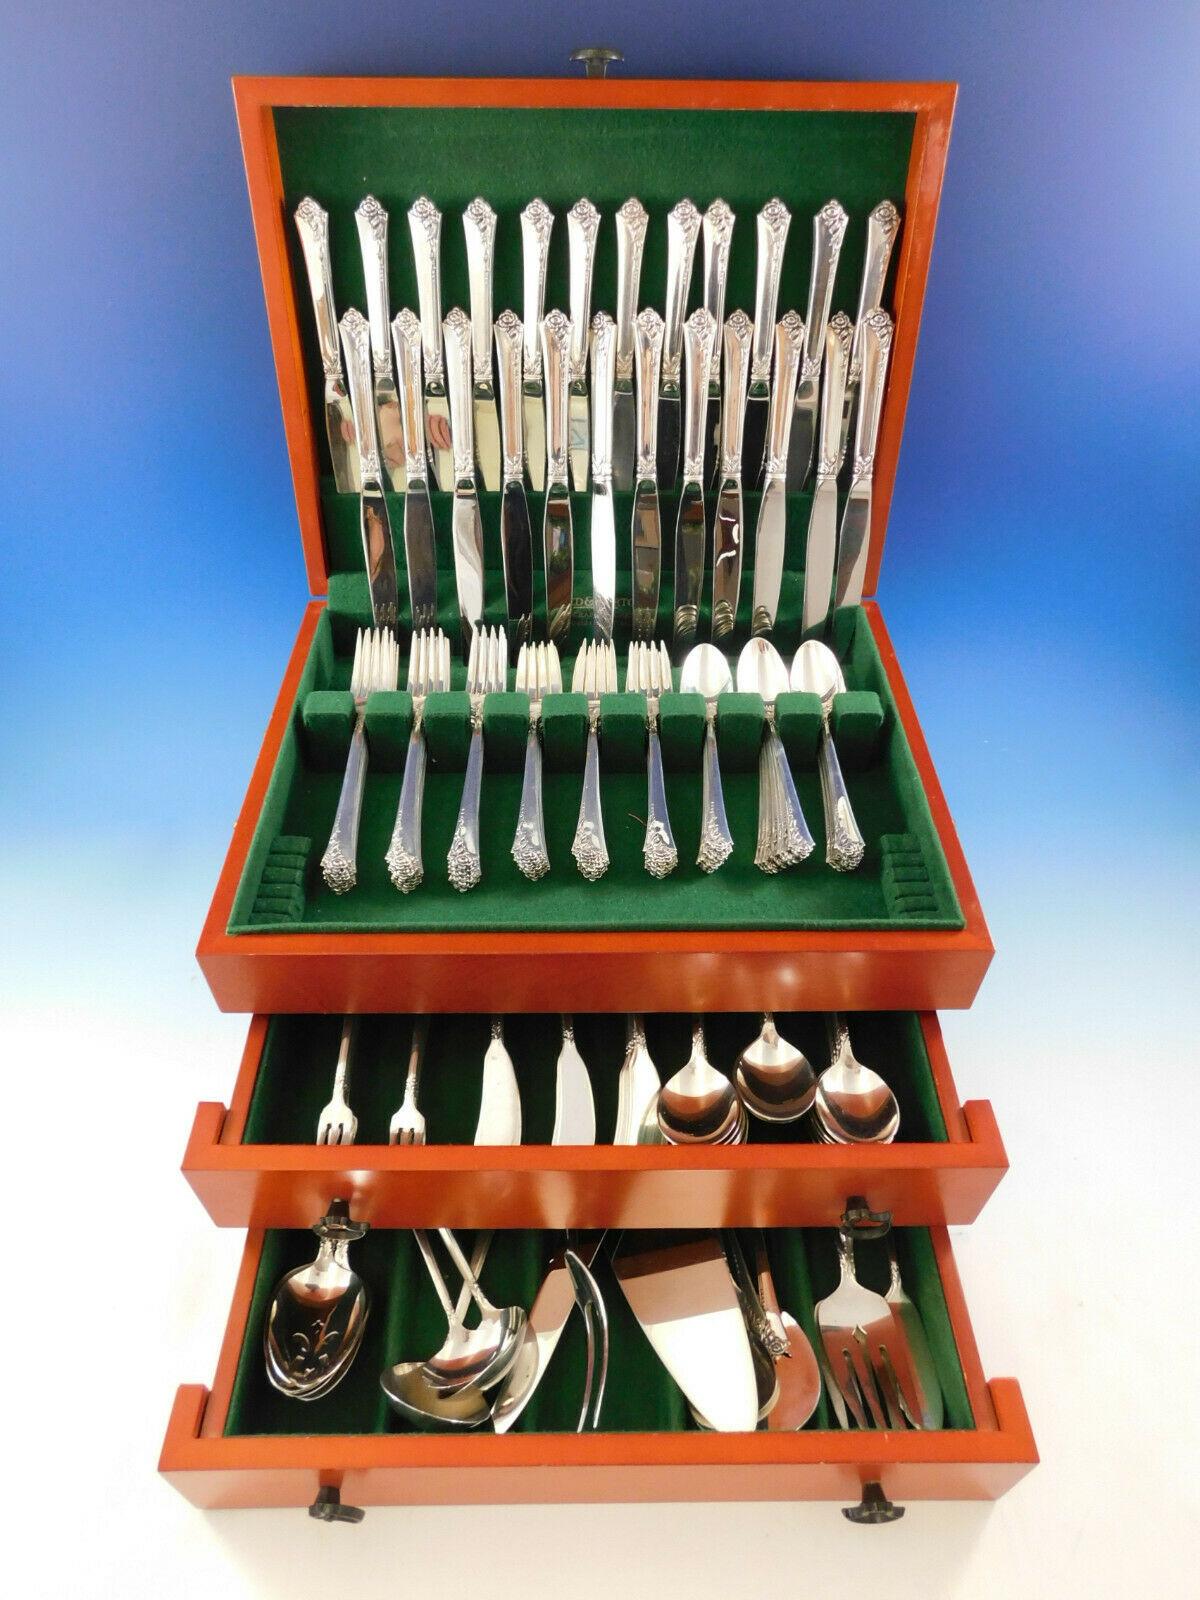 Monumental damask rose by Oneida sterling silver flatware set, 188 pieces. This set includes:

24 knives, 8 3/4